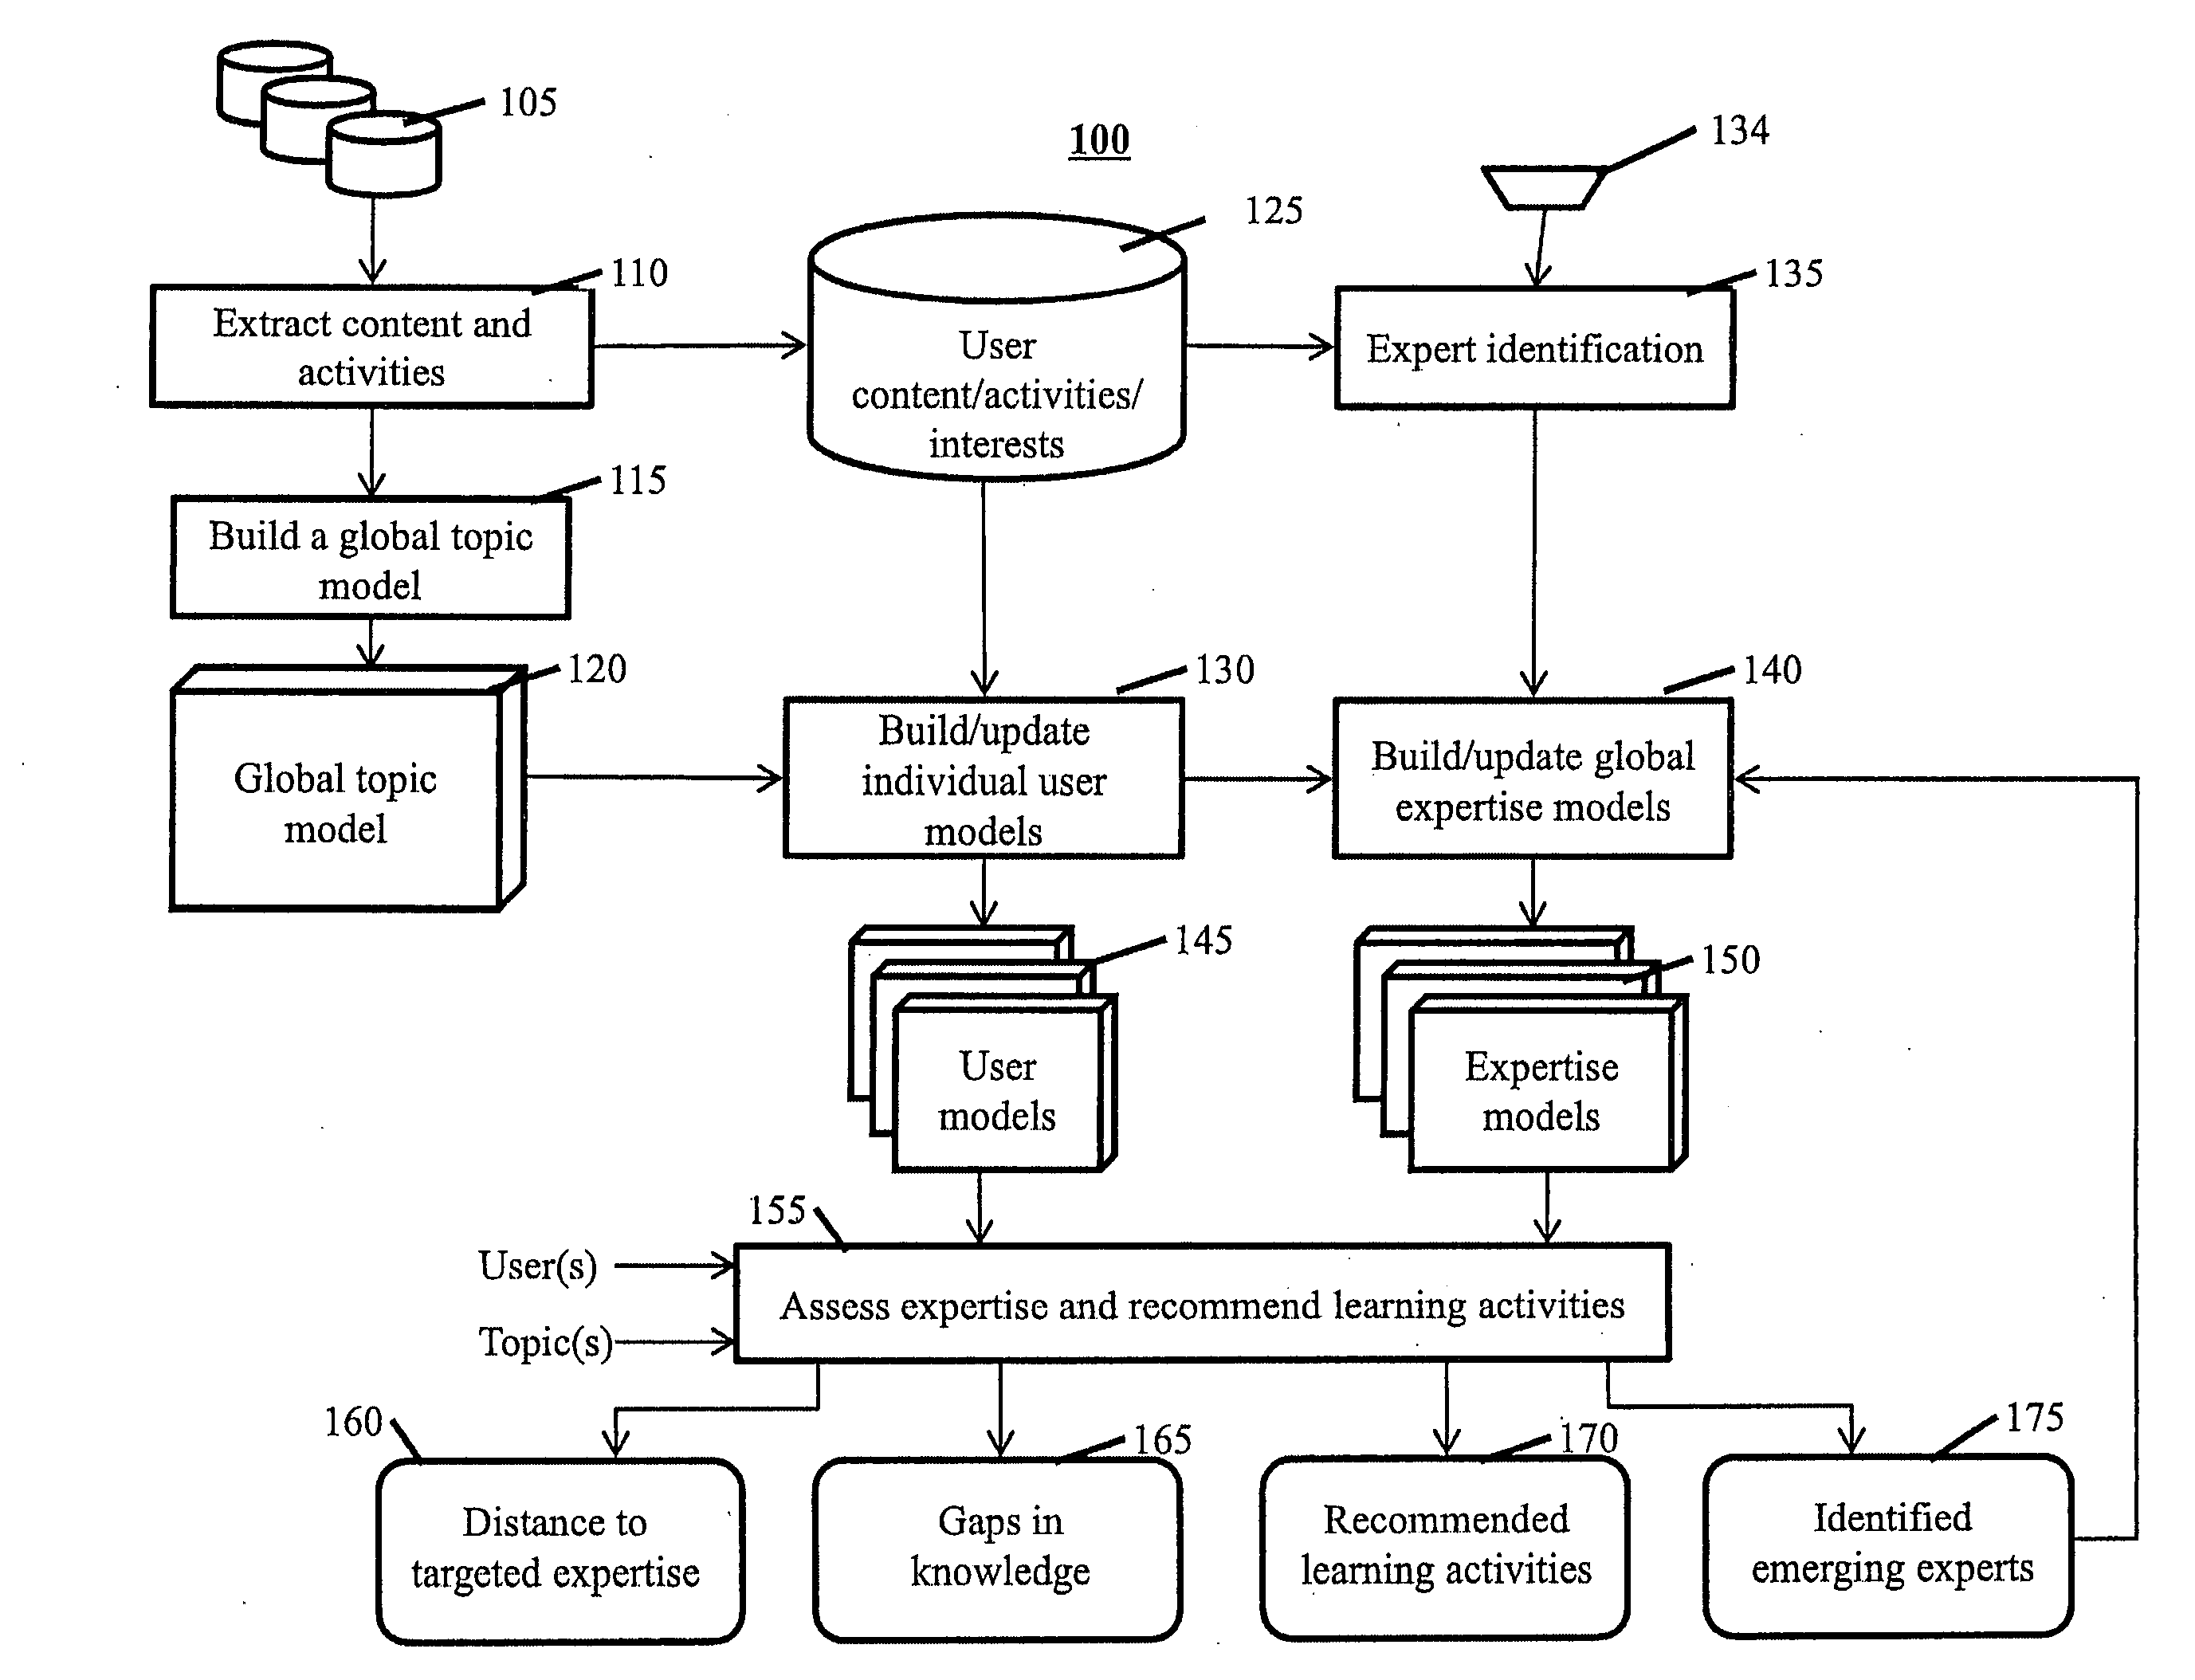 Systems, methods, and computer program products for expediting expertise